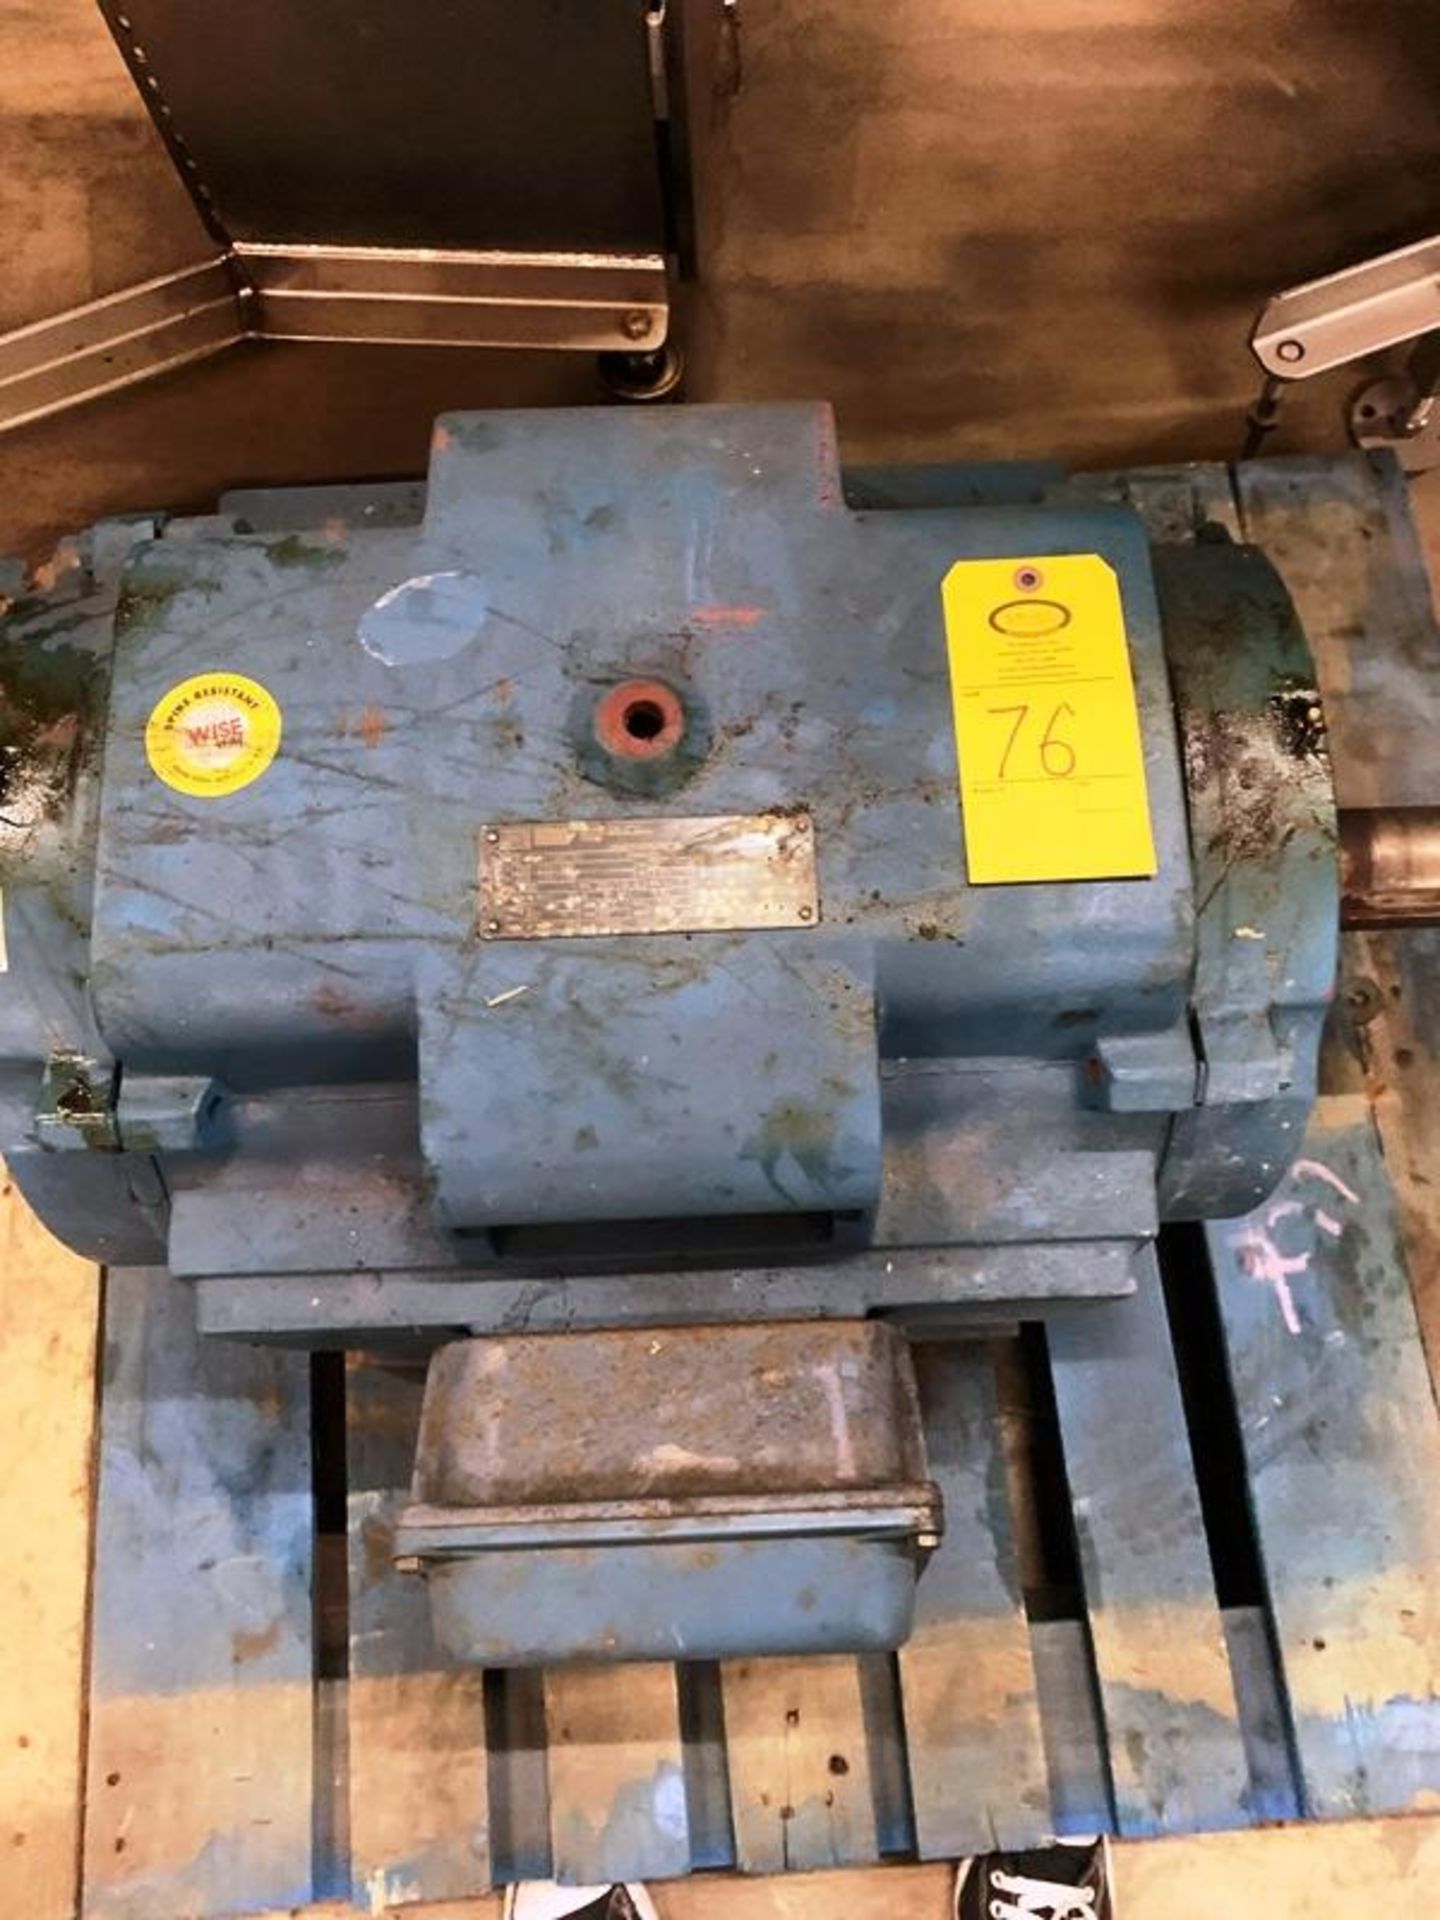 Used Motor, 75 h.p., 230/460 volts (Located in Sandwich, IL) - Image 2 of 4